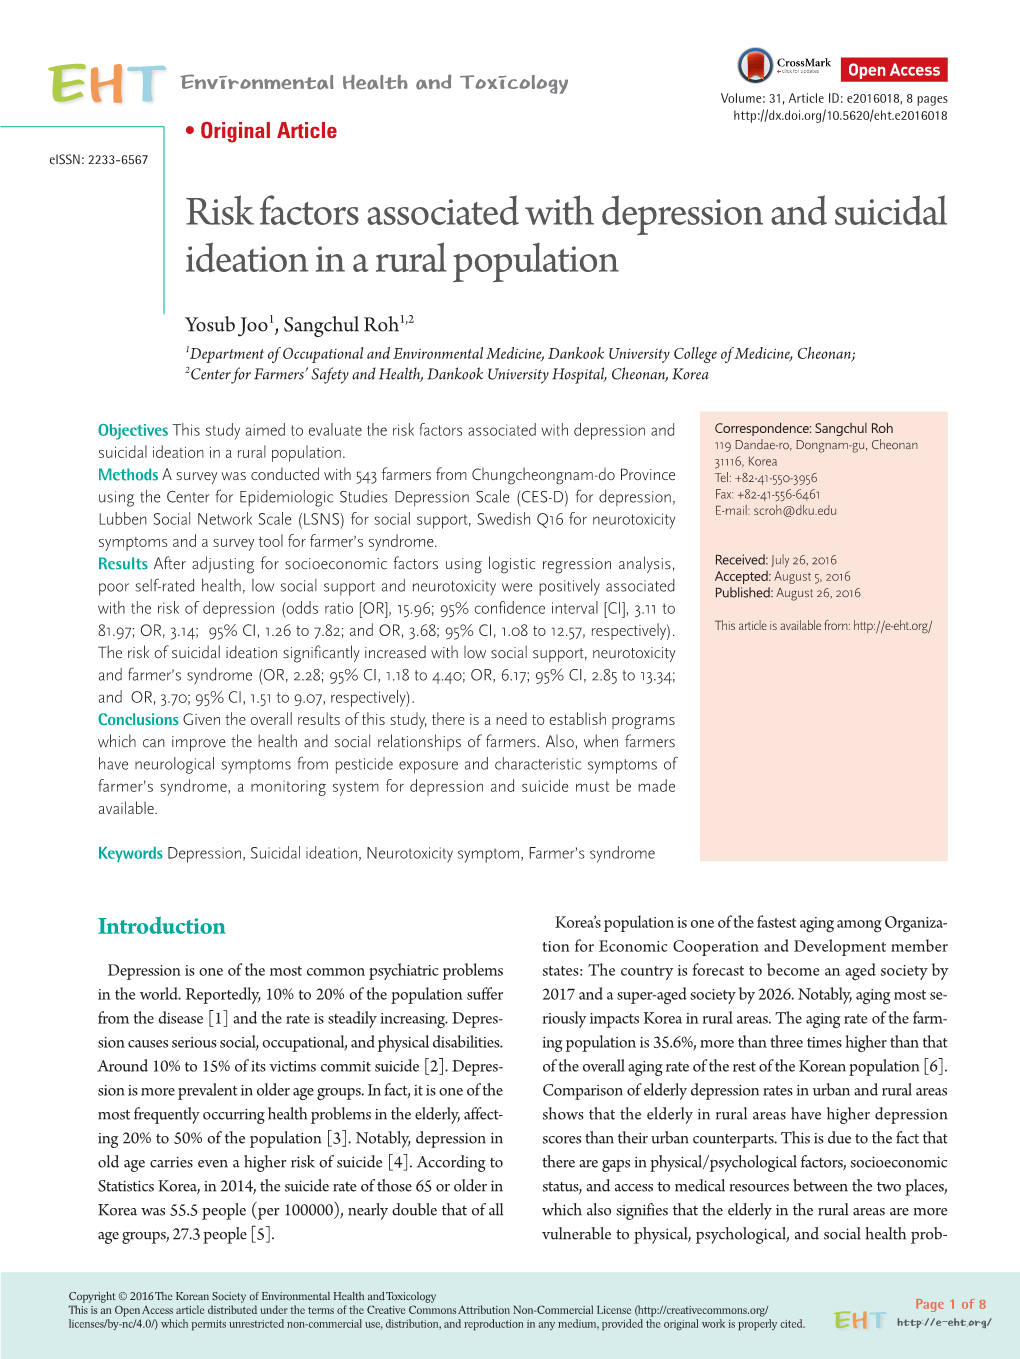 Risk Factors Associated with Depression and Suicidal Ideation in a Rural Population